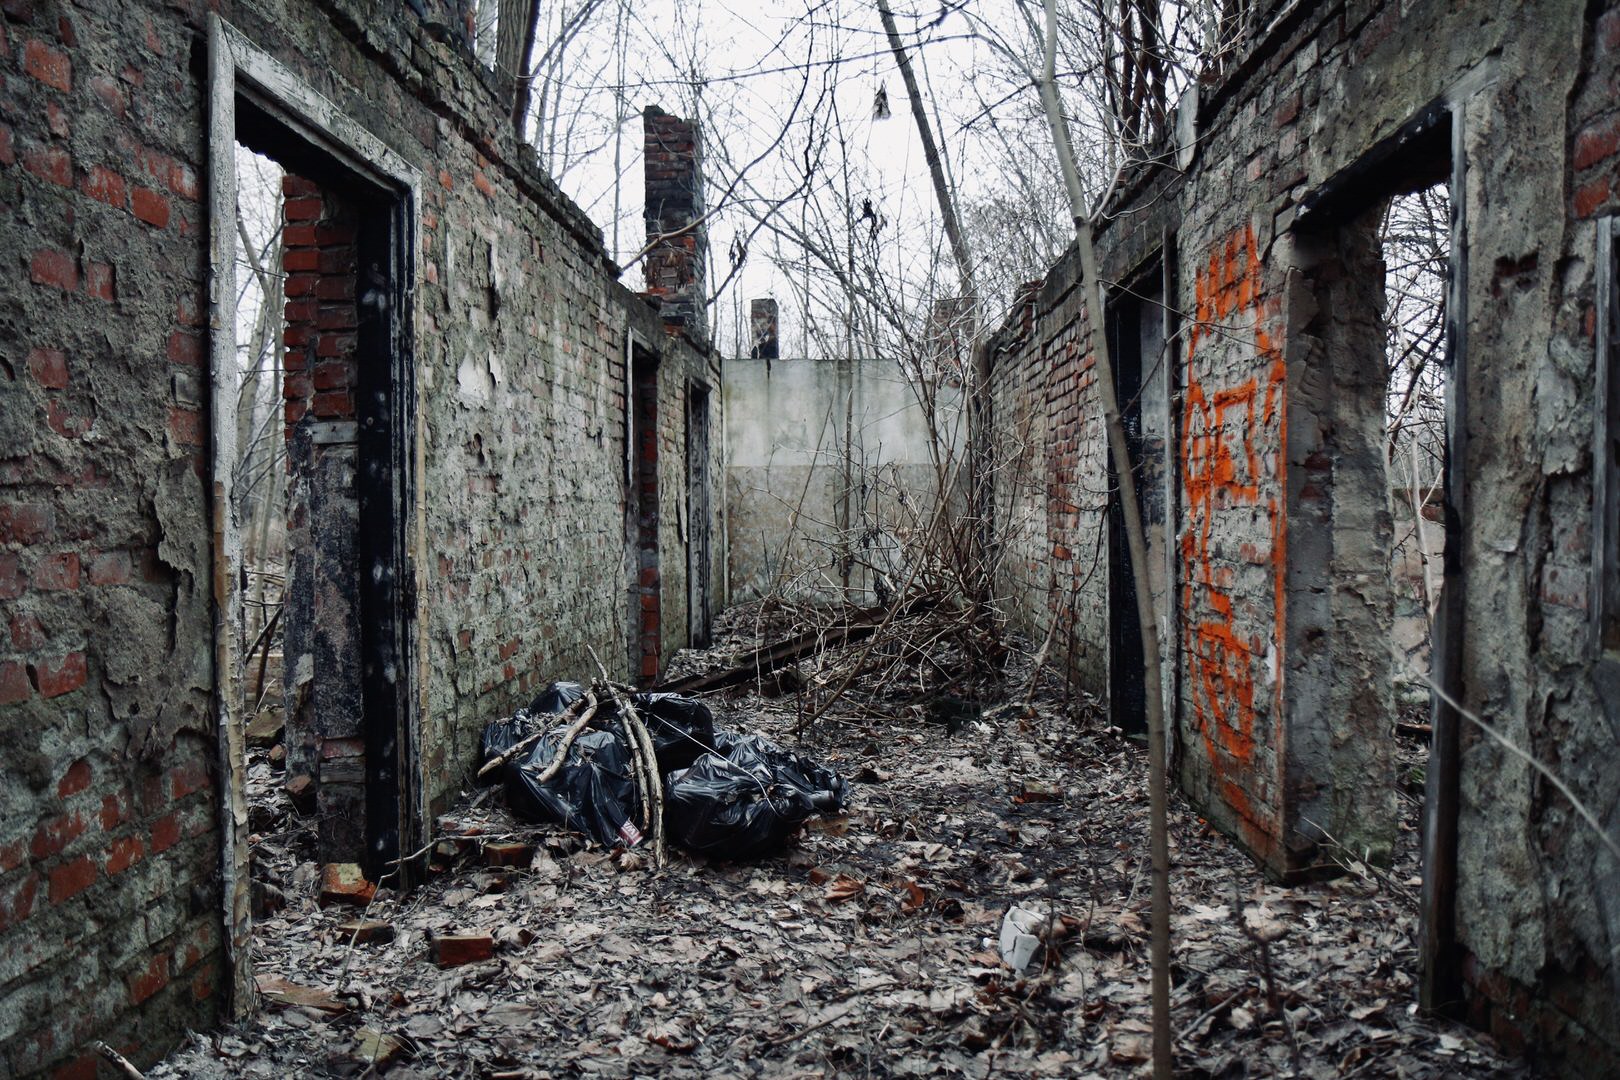 The exterior of some abandoned buildings